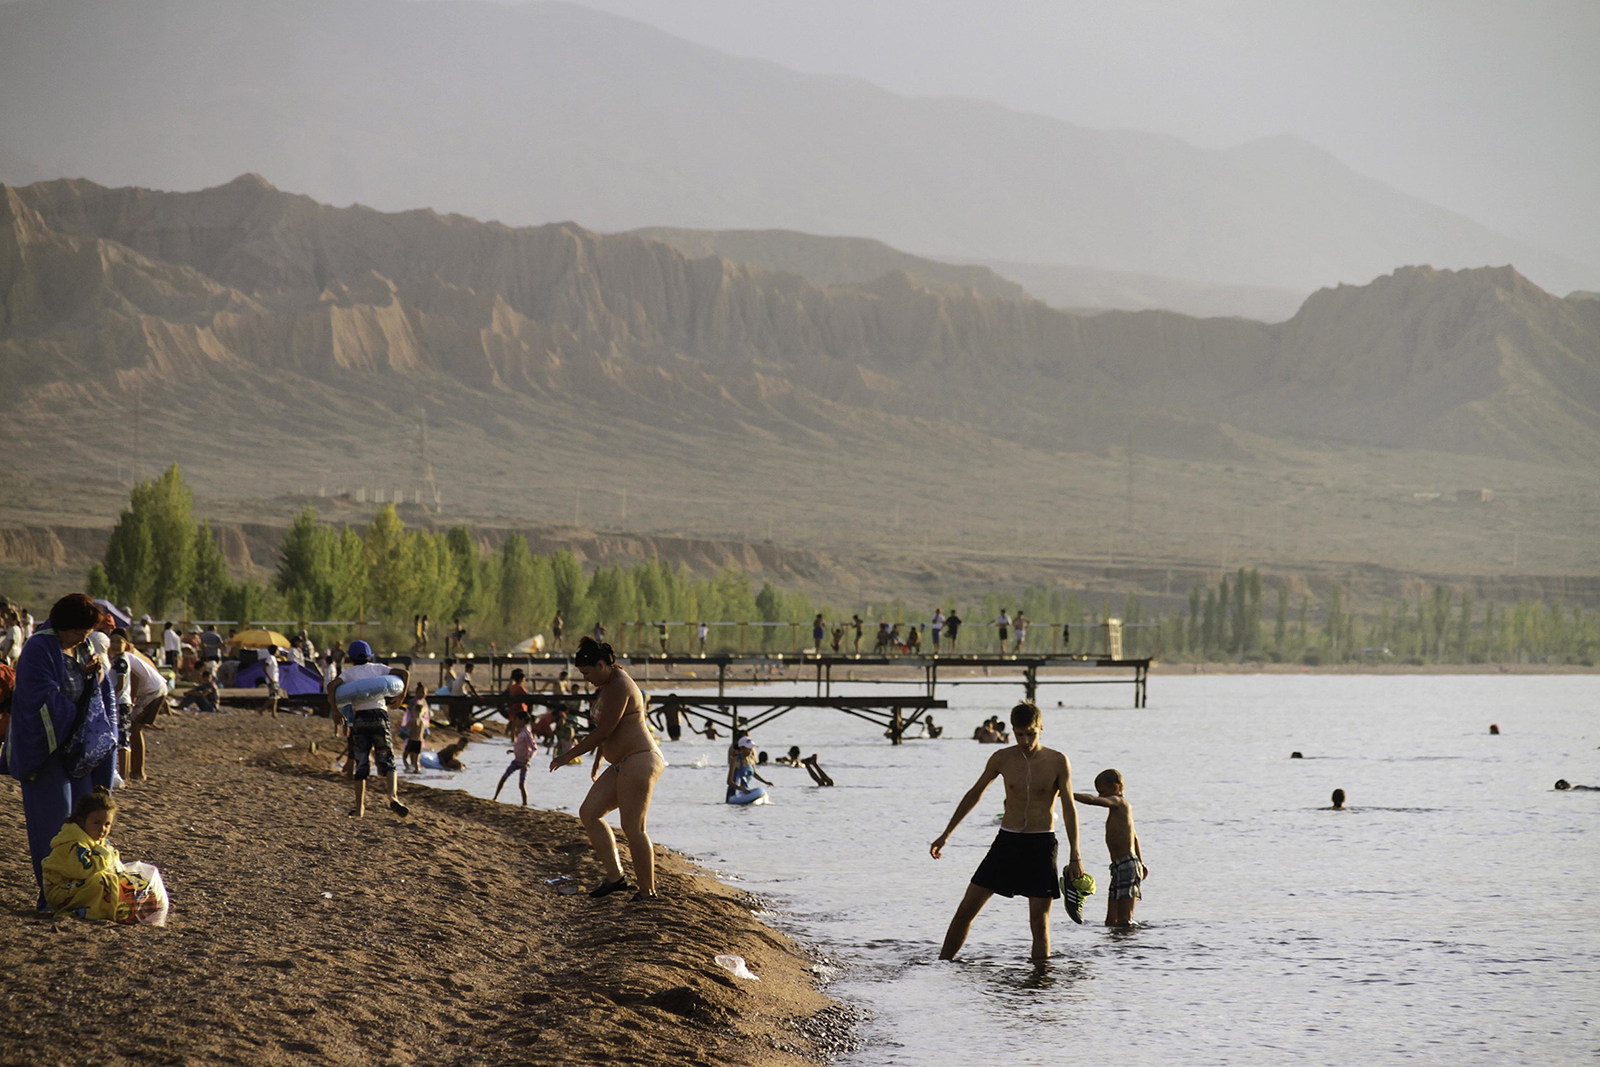 People visit a beach on the southern shore of Issyk Kul, near theManzhyly-Ata sacred springs area, in Kyrgyzstan. (Photo by Maxim Van den Bossche/Wikipedia/Creative Commons)